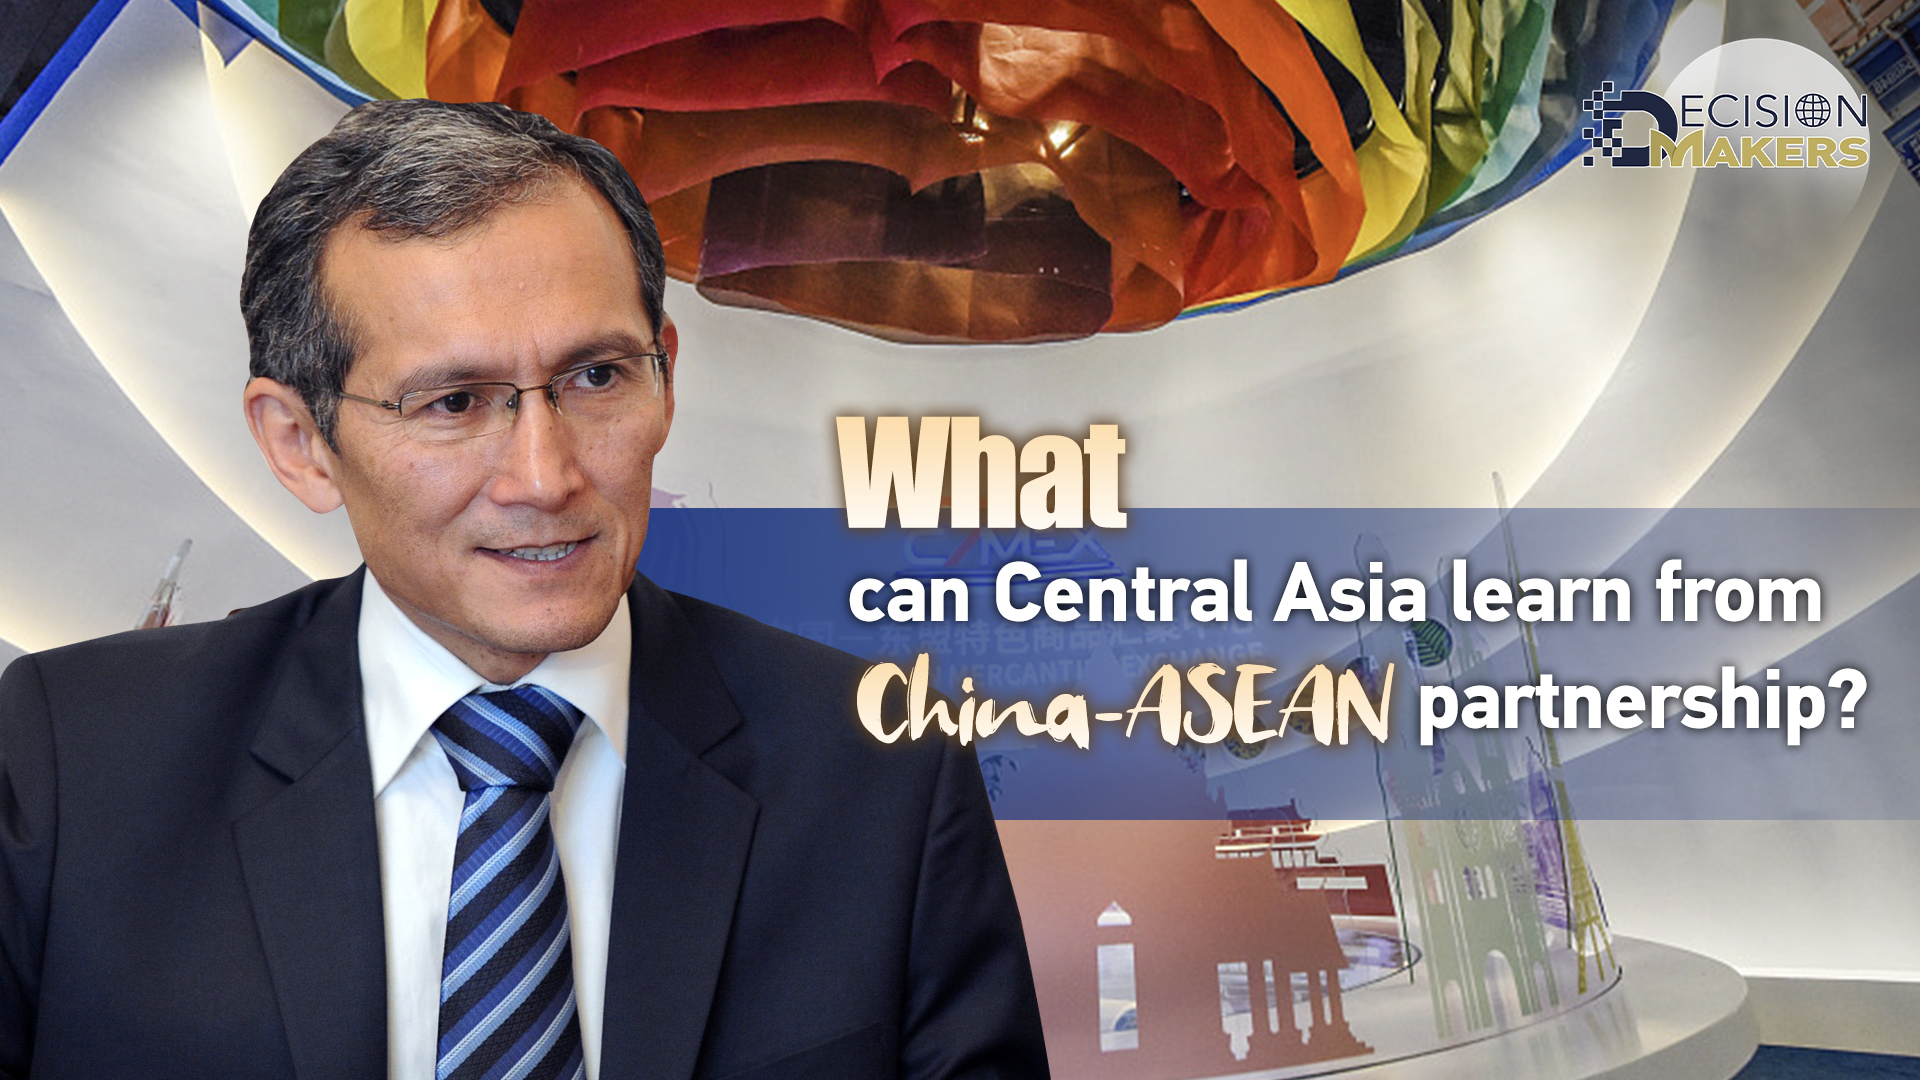 What can Central Asia learn from China-ASEAN partnership?